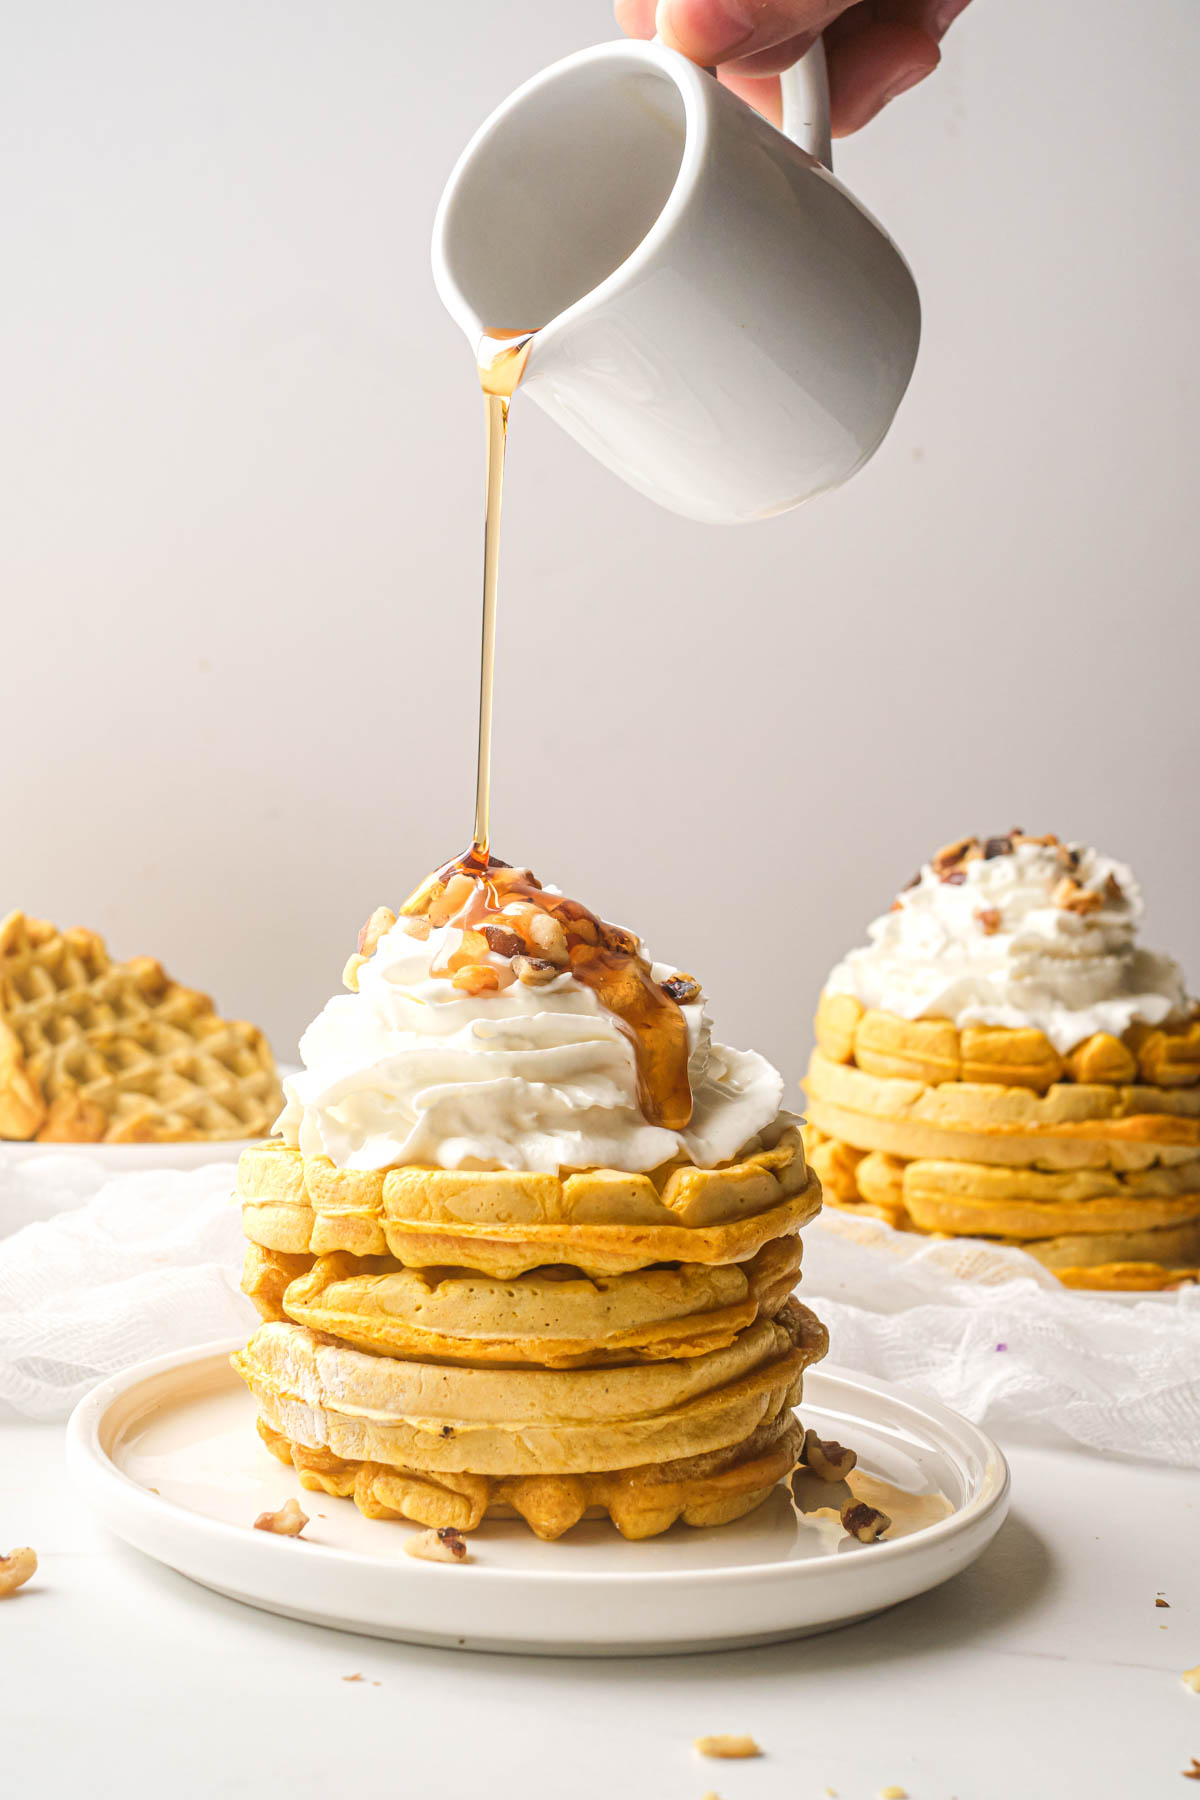 syrup being poured on top of a stack of pumpkin waffles